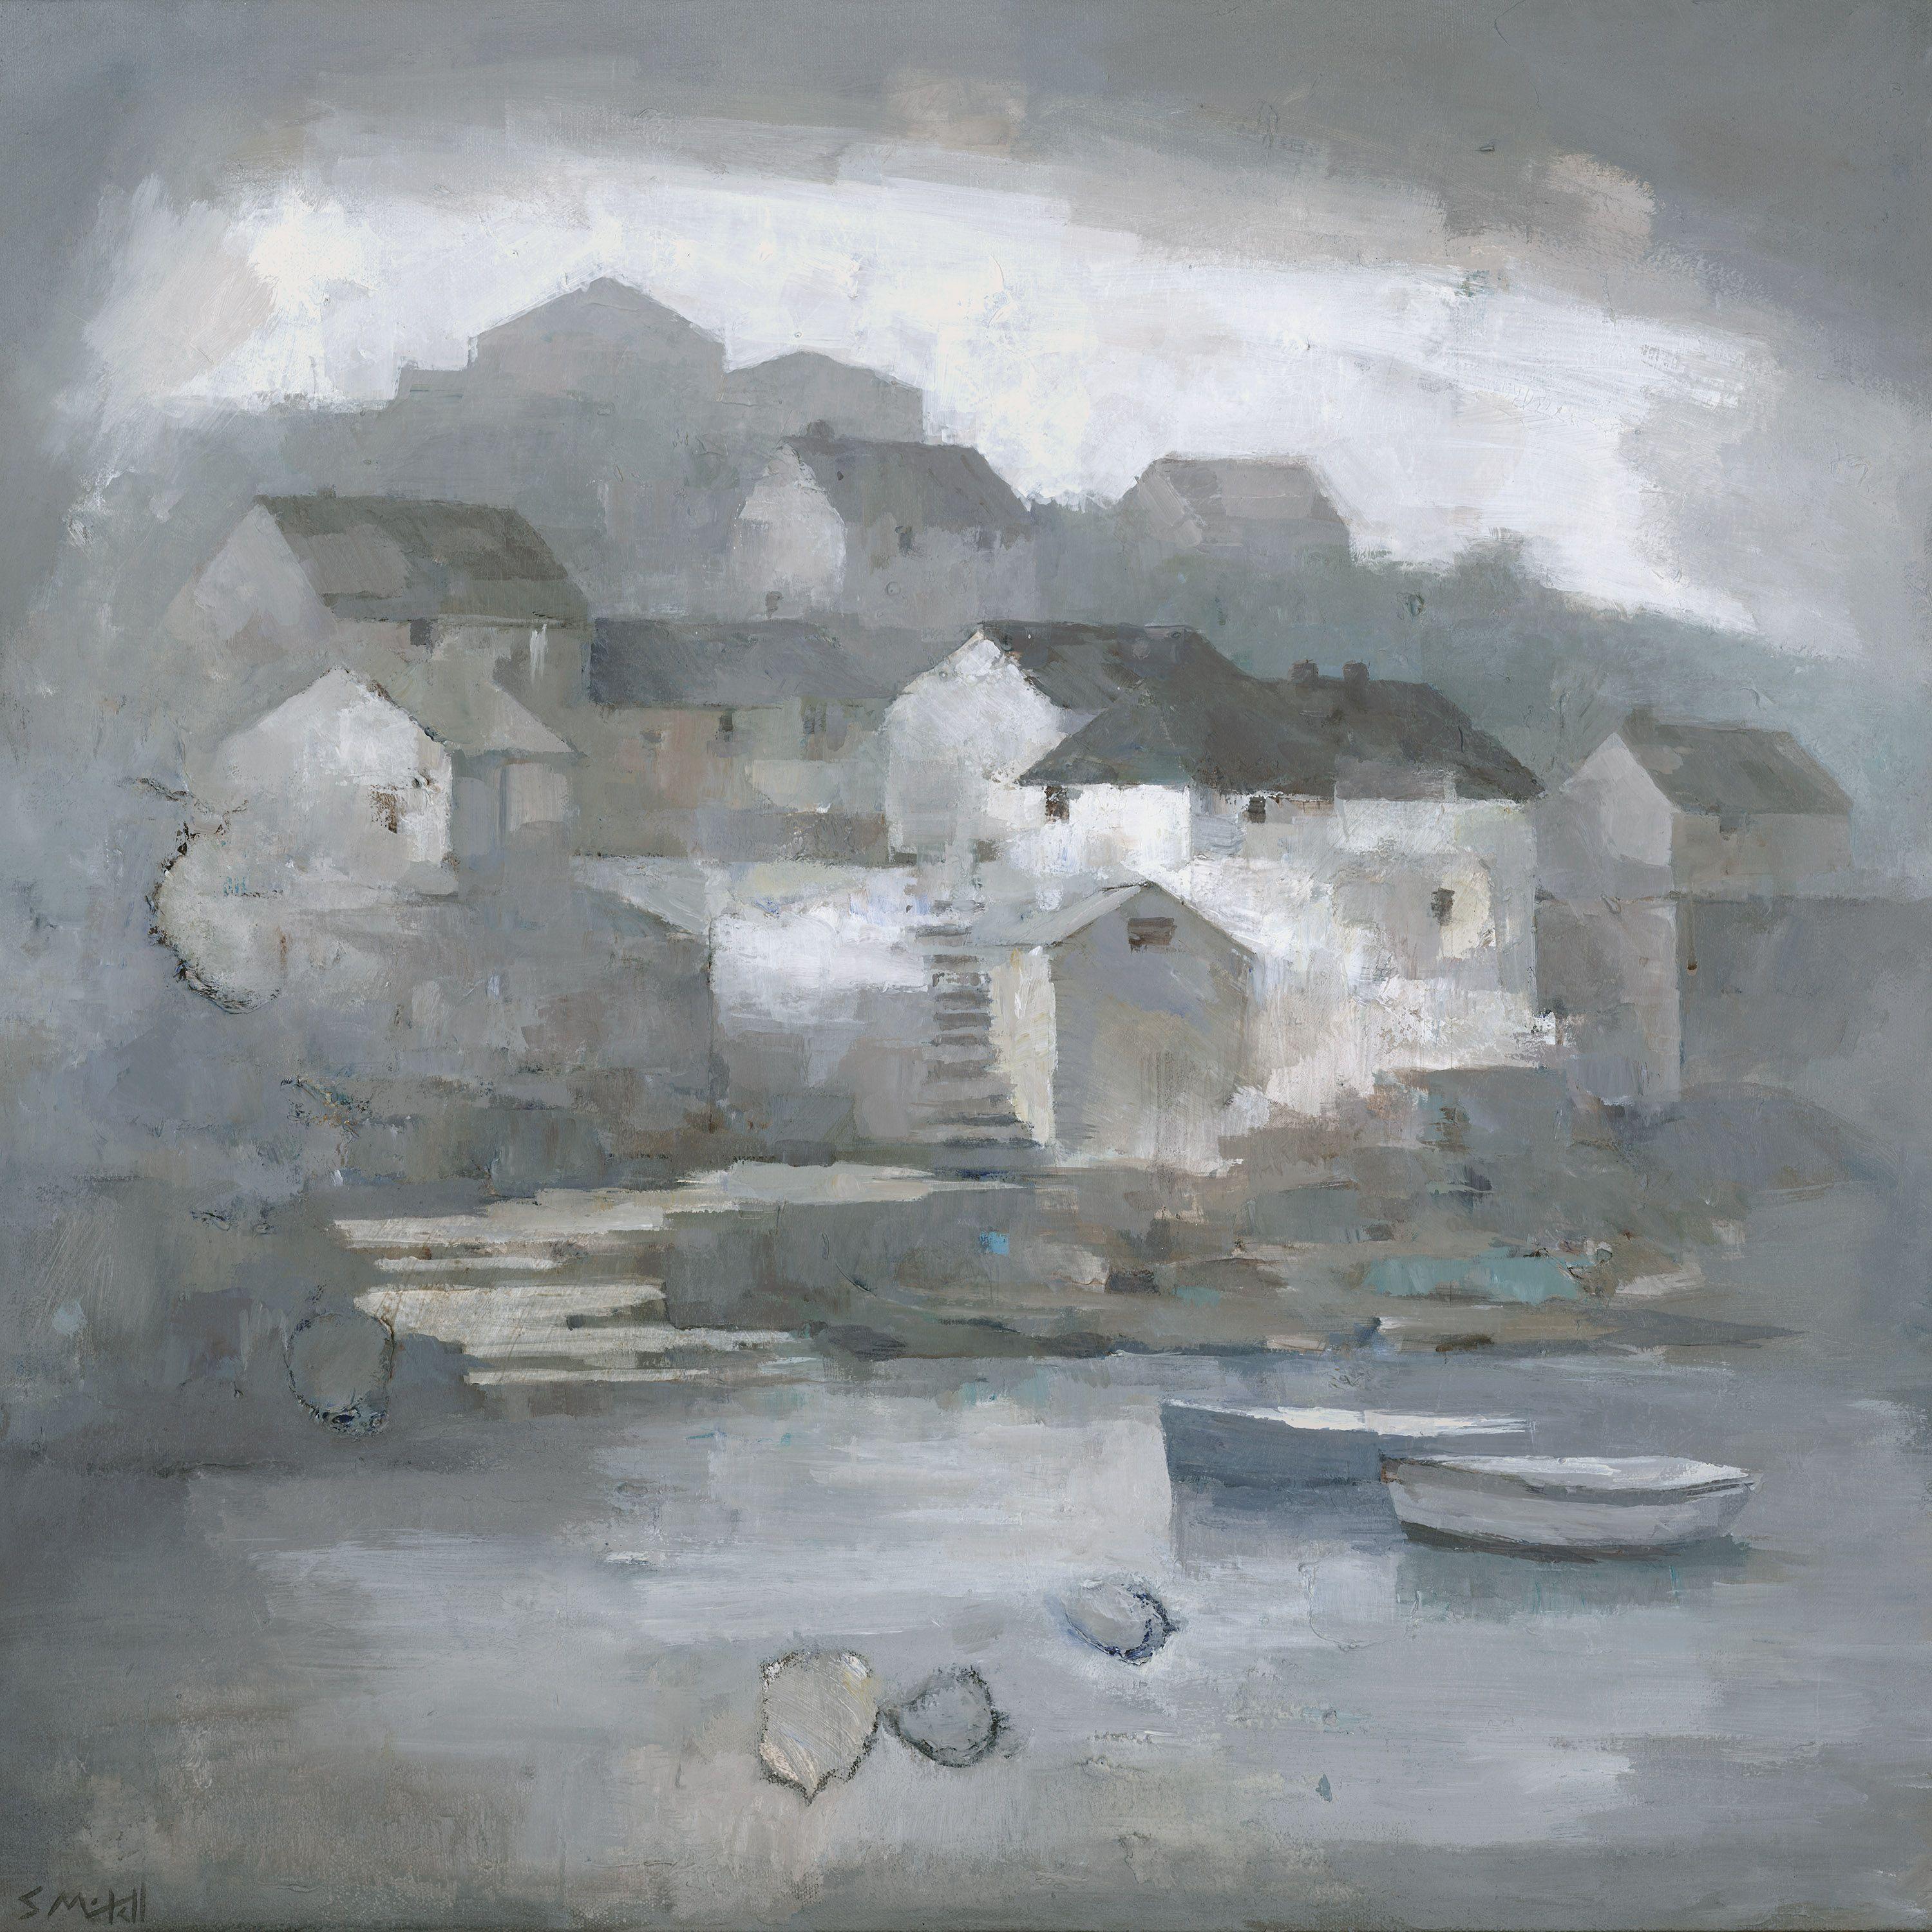 This is an original painting of Coverack harbour, Cornwall. I painted this with interesting textures, and a soft, muted palette of white, grey and blue, giving the impression of a dream or memory.    It is painted on deep profile stretched canvas.